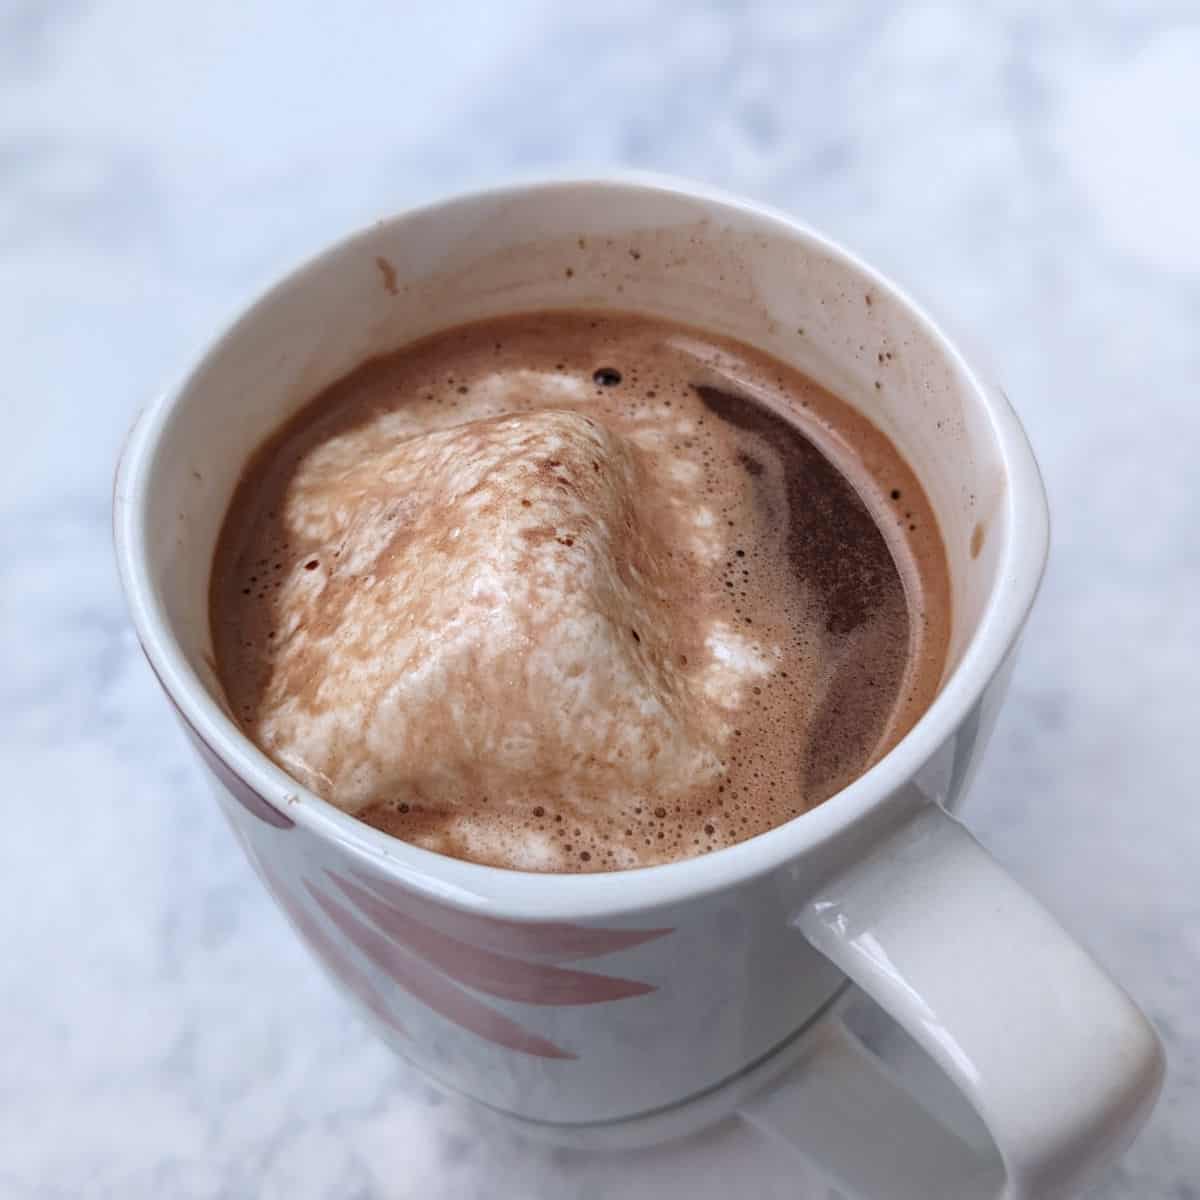 hot chocolate in a mug, with melted marshmallow